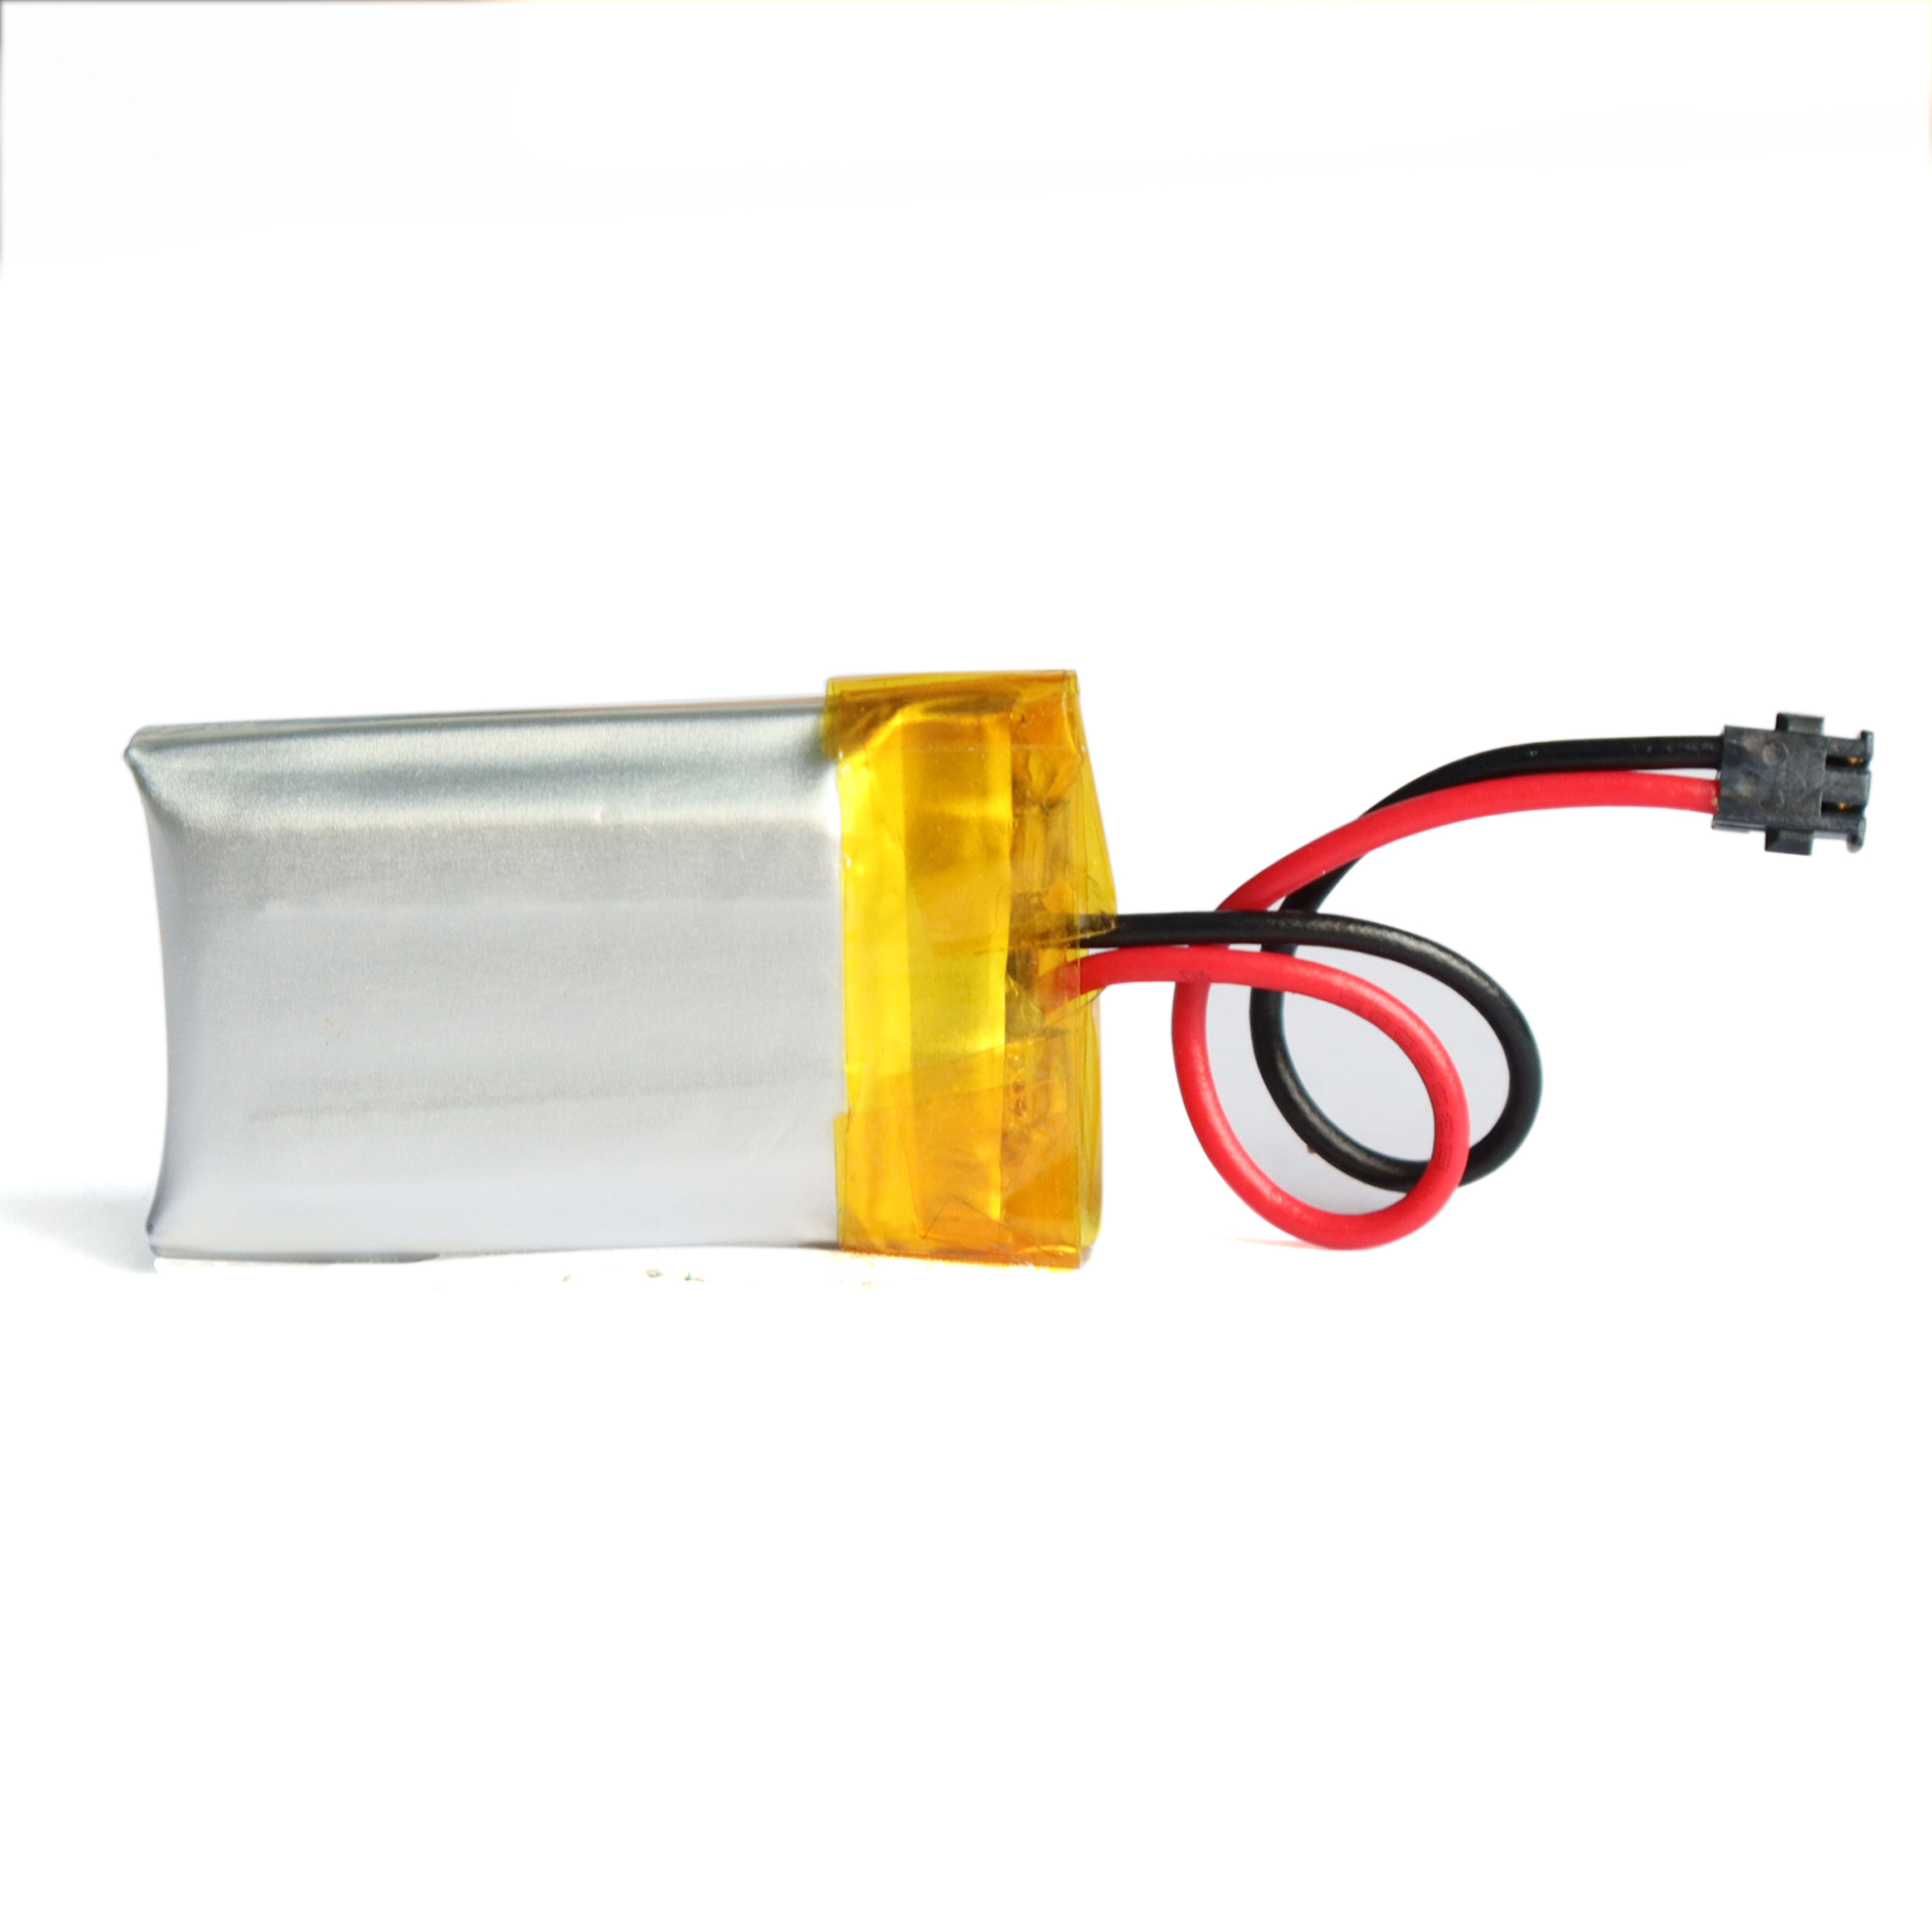 Lithium Polymer Battery 3.7V 140mAh for Bluetooth Device 